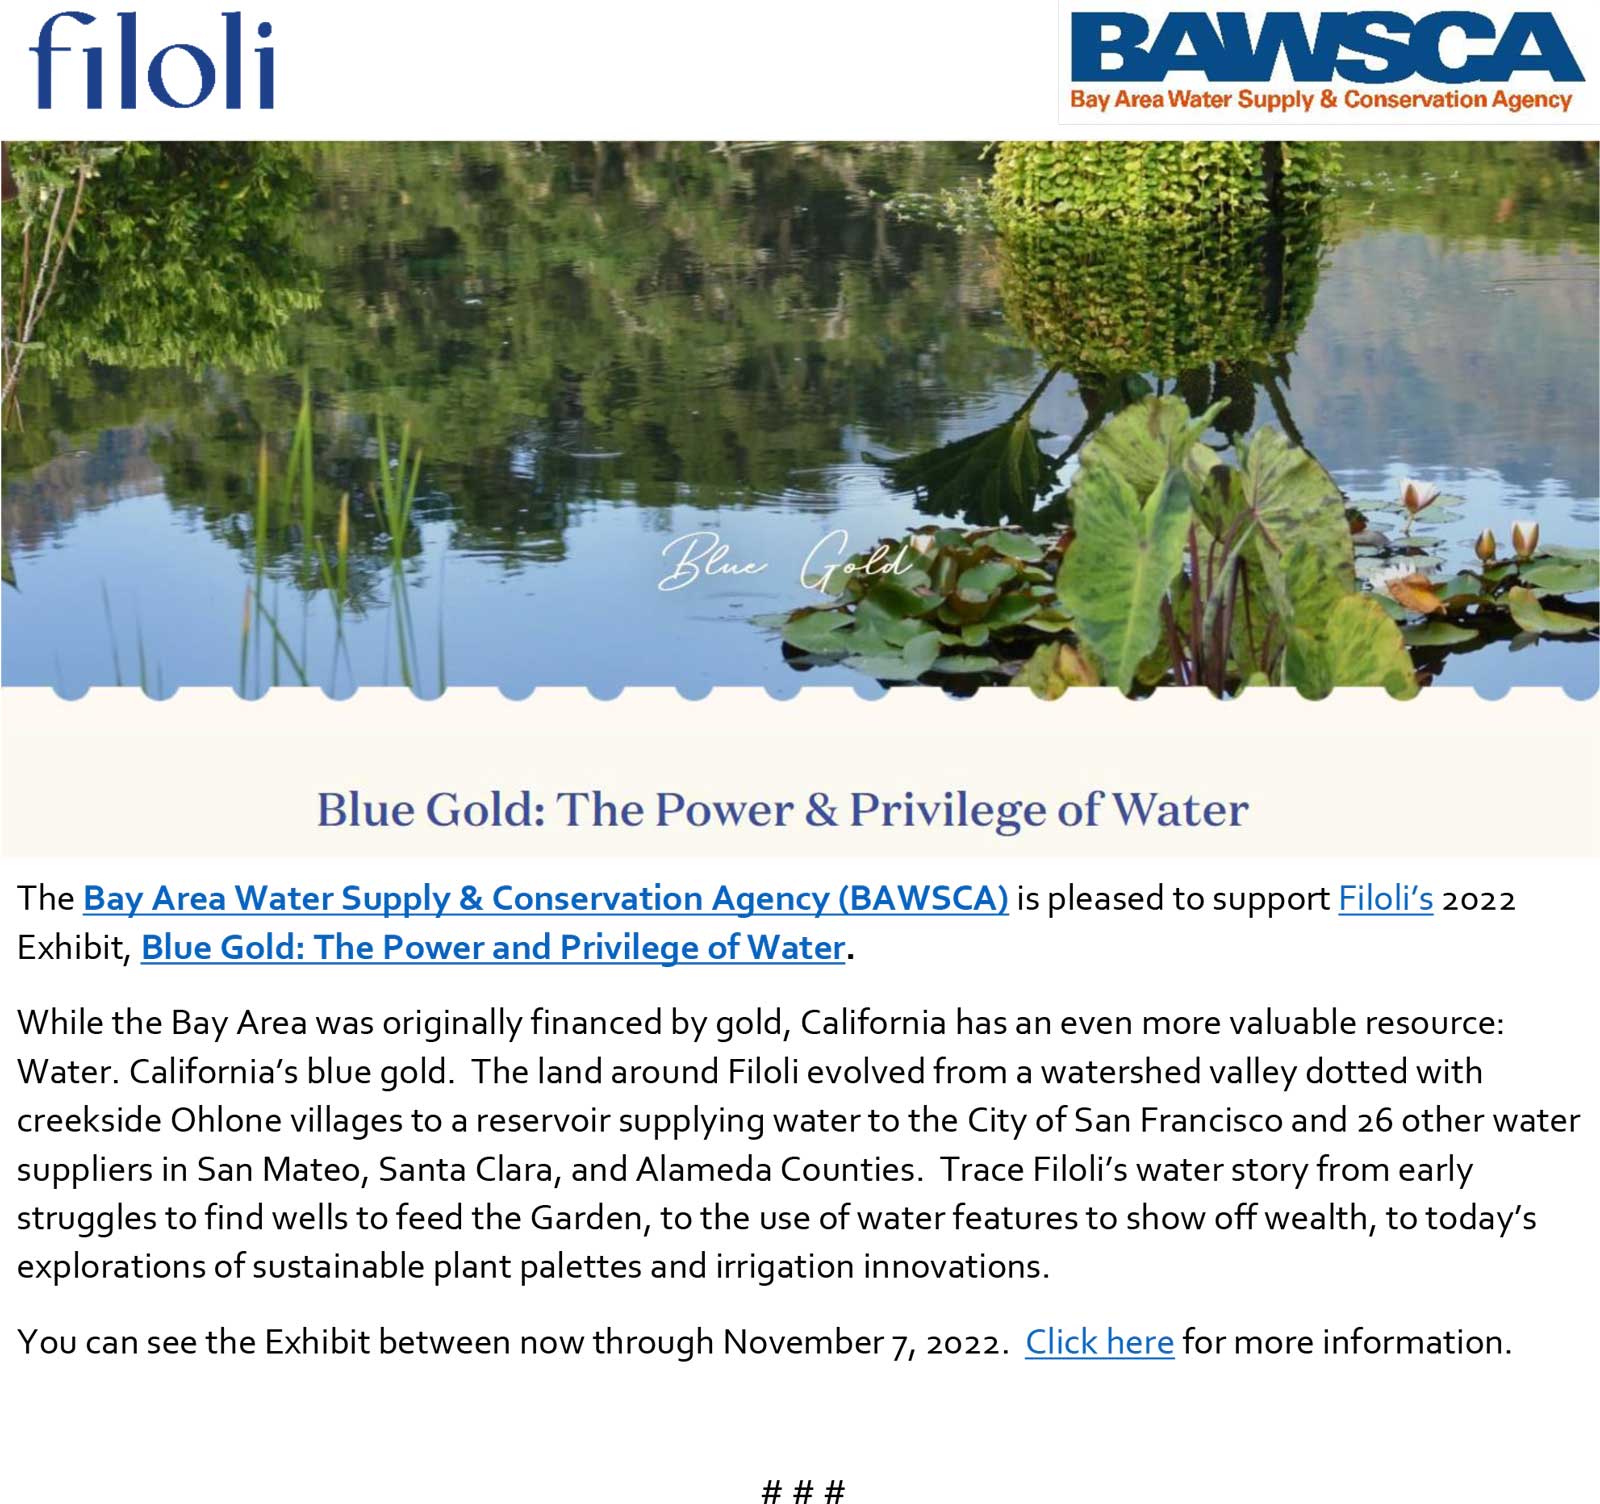 Filoli 2022 Exhibit from BAWSCA - Blue Gold: The Power and Privilege of Water